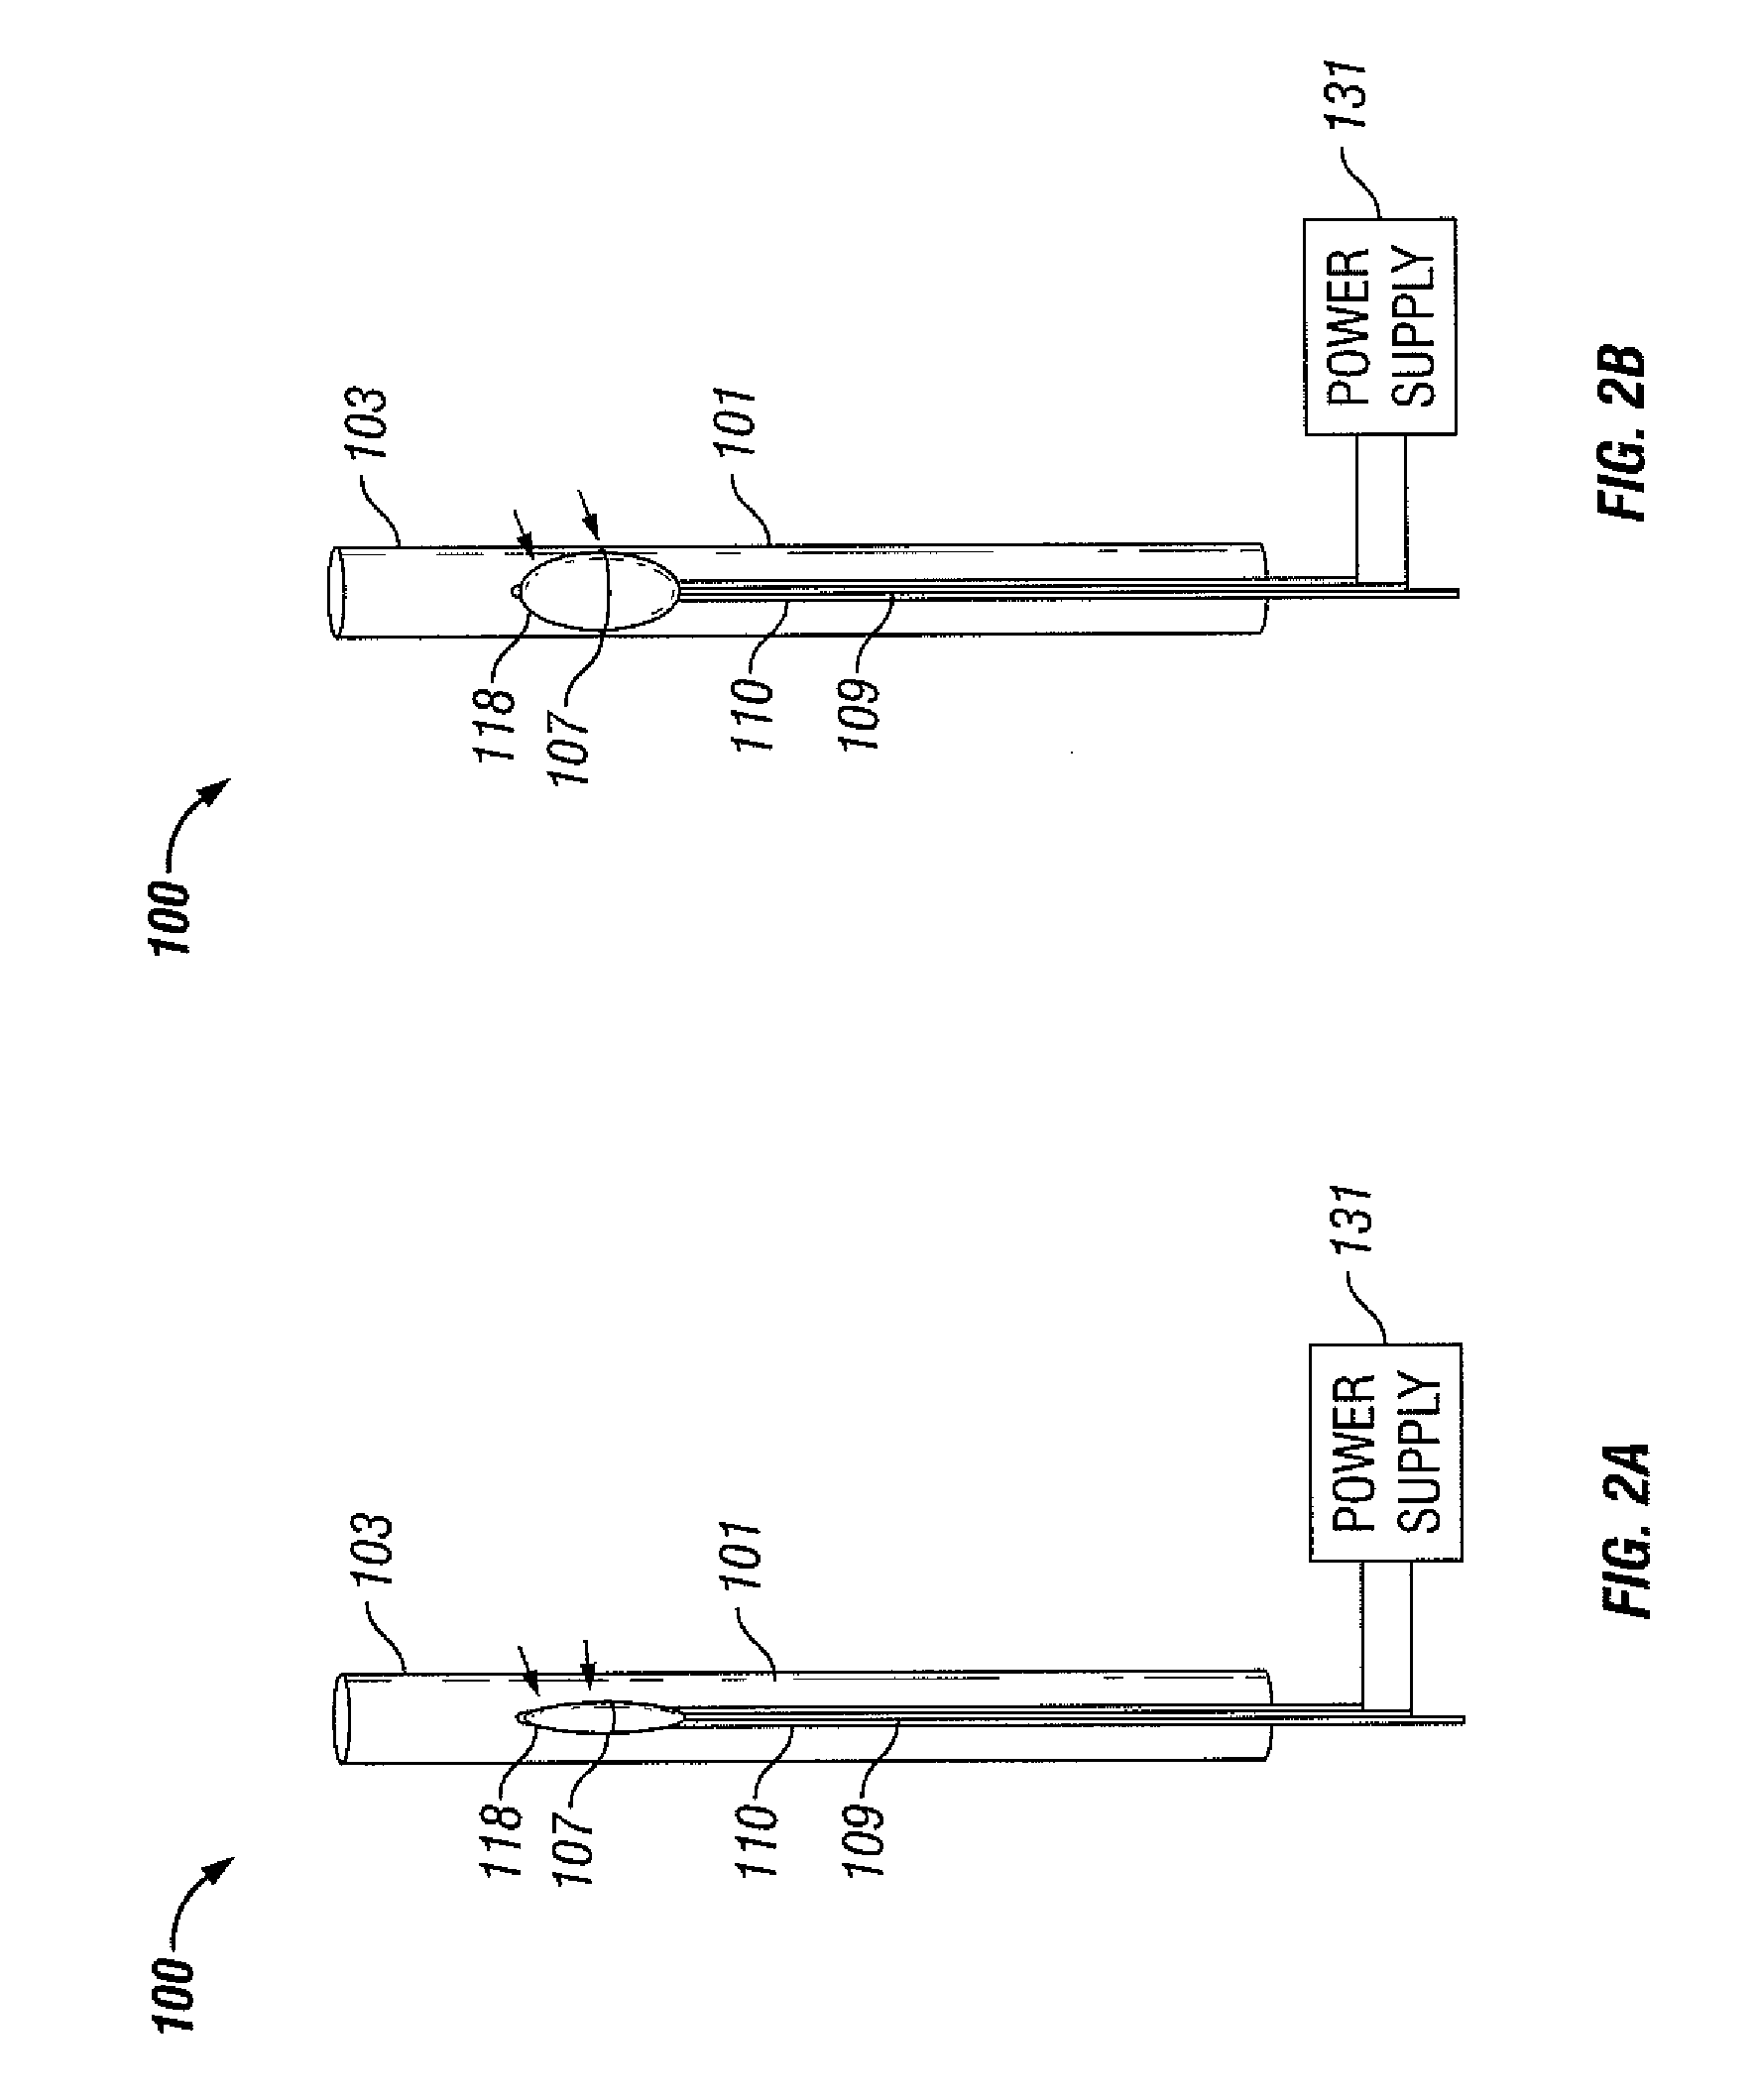 Method and apparatus for the detachment of catheters or puncturing of membranes and intraluminal devices within the body